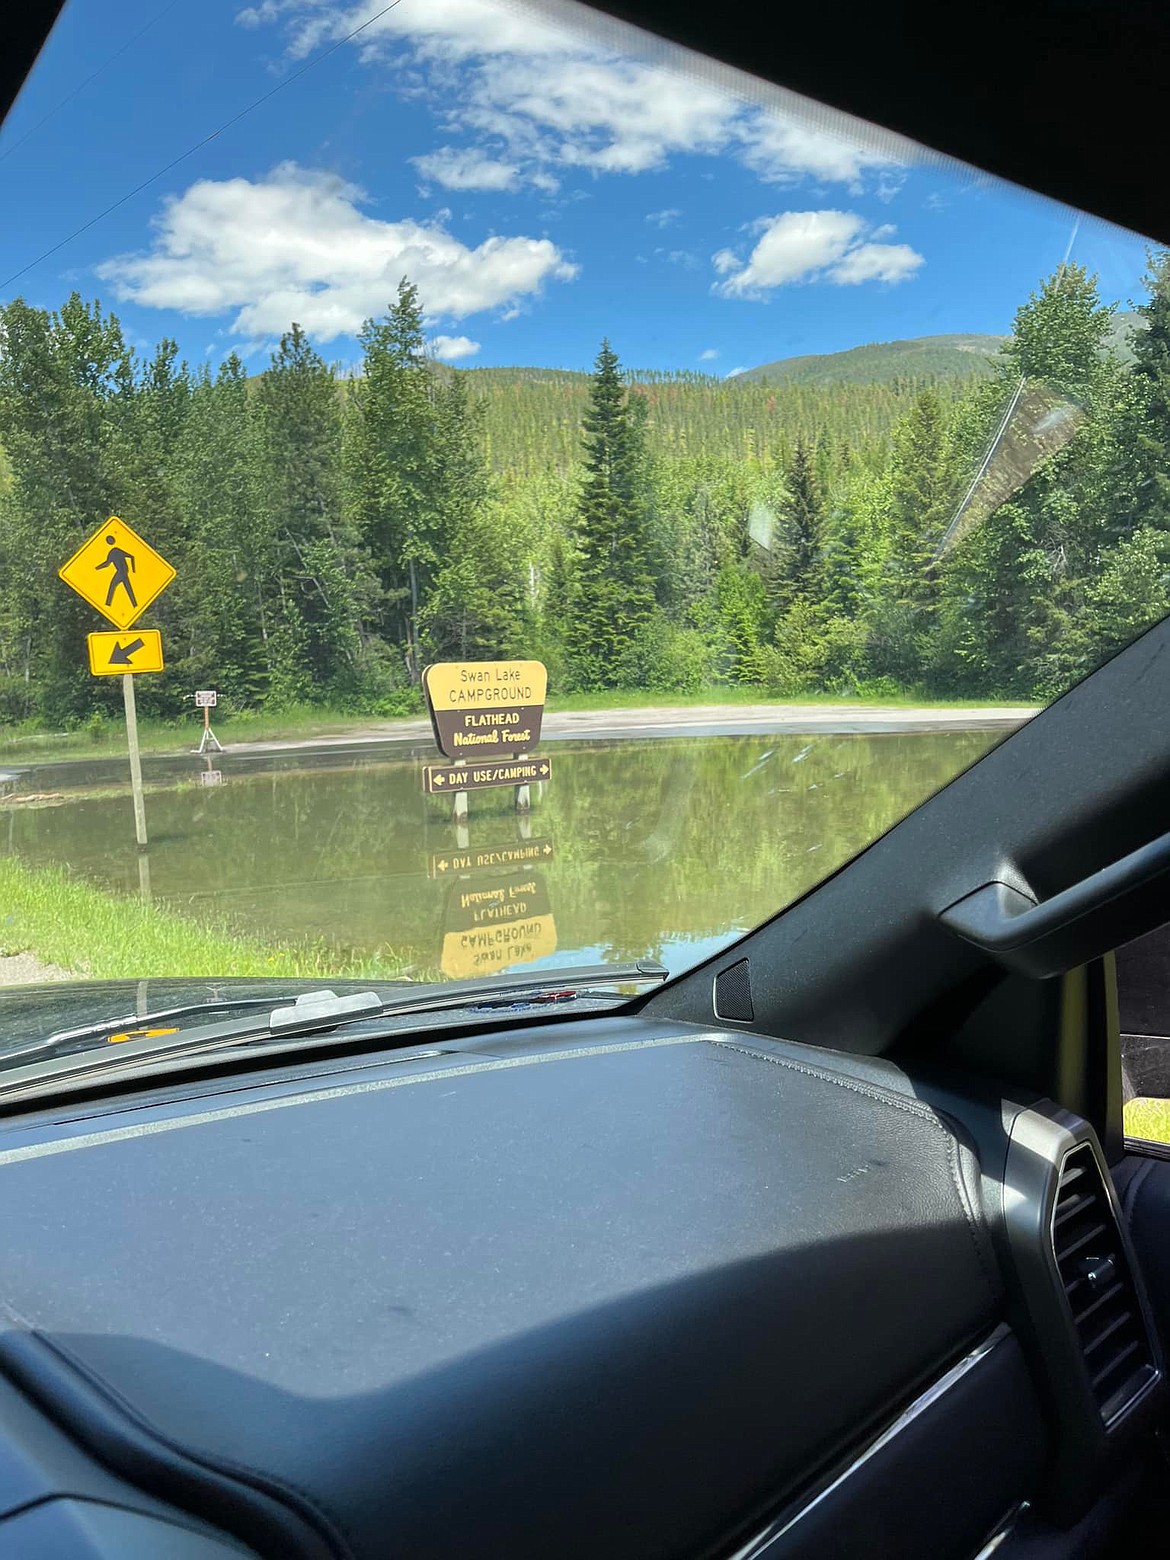 Flooding at Swan Lake Campground. (photo provided by Jamie Osborne Wenzel)